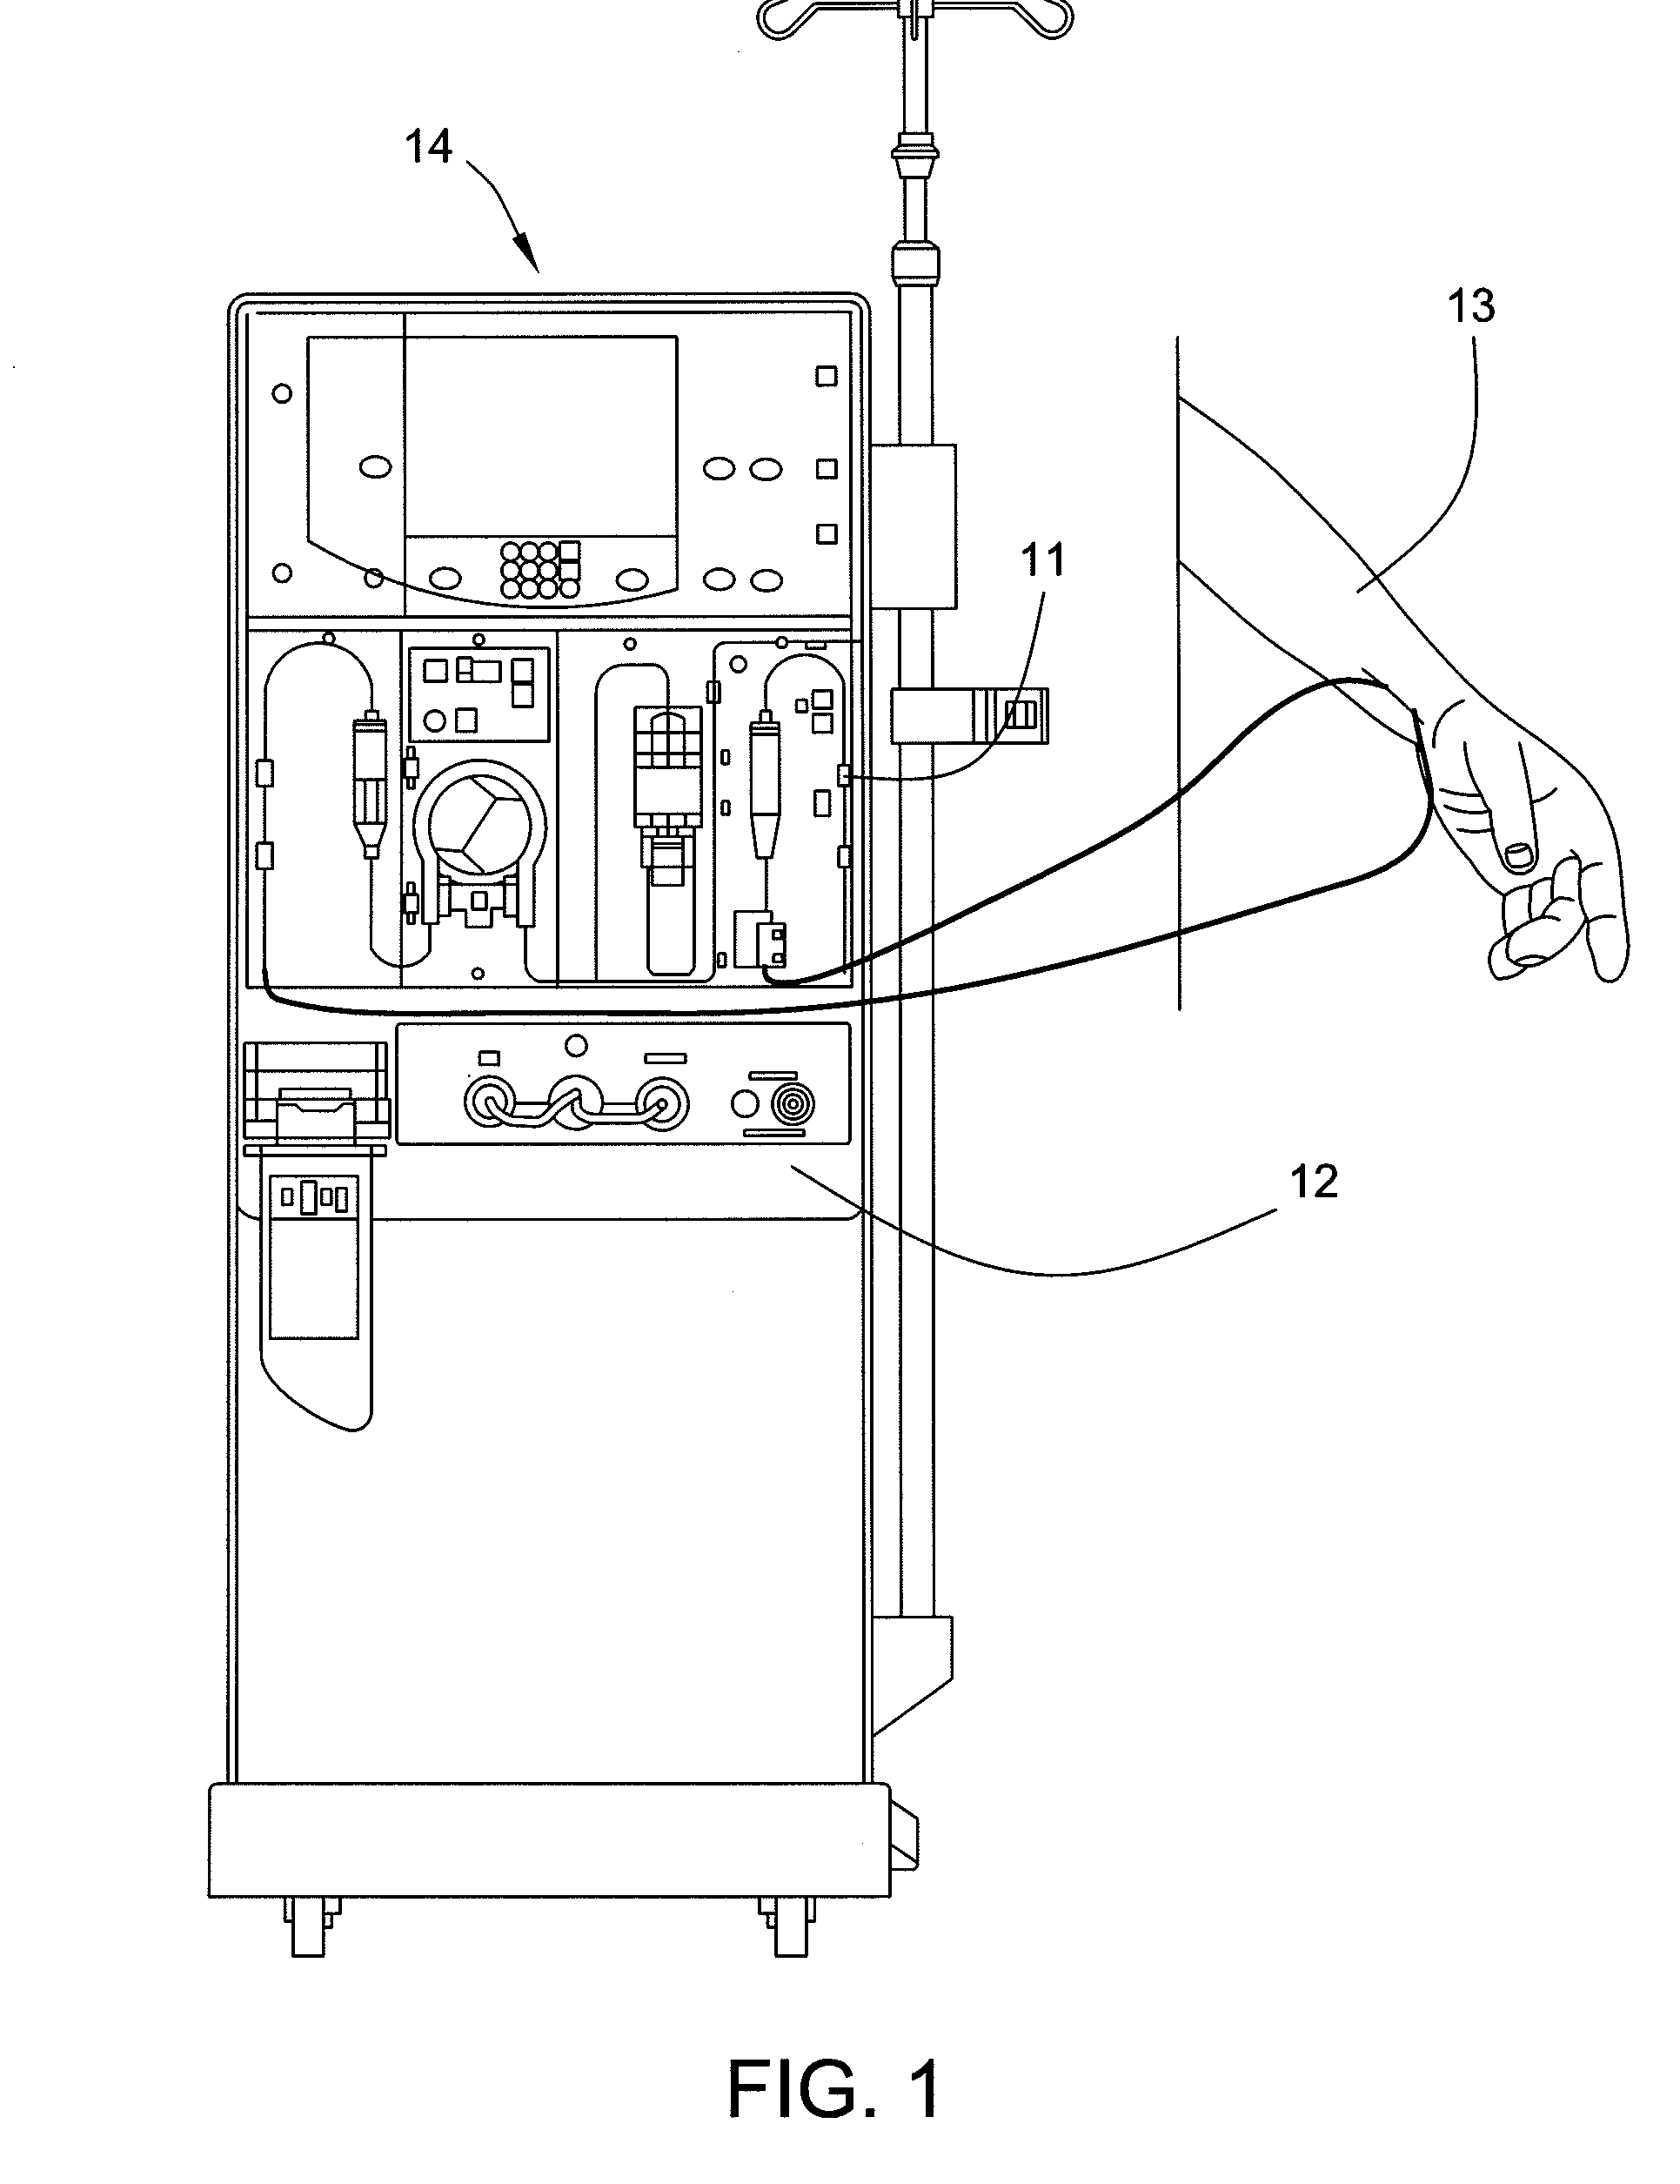 Method for removing gases from a container having a powdered concentrate for use in hemodialysis